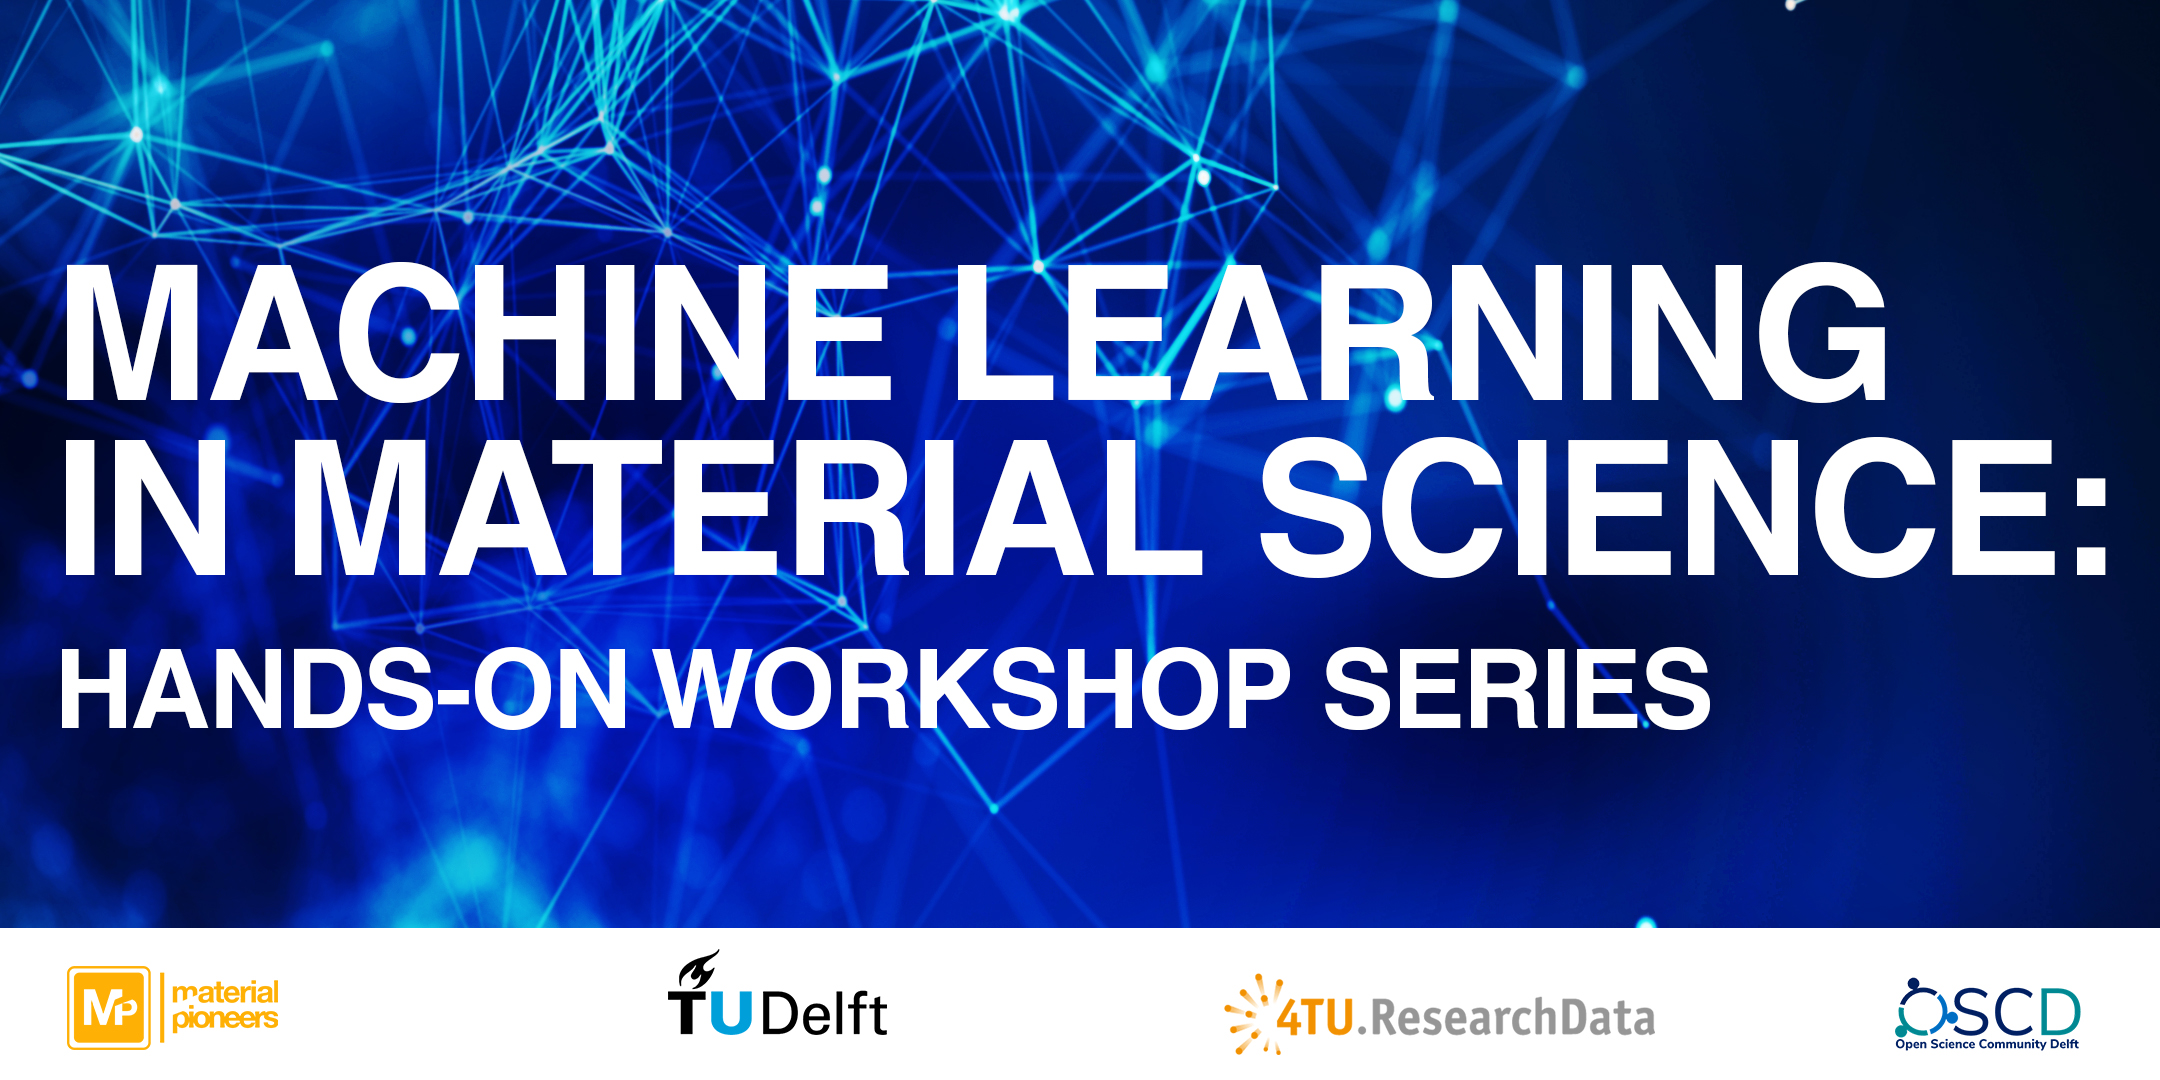 Workshop series on machine learning applications in material science